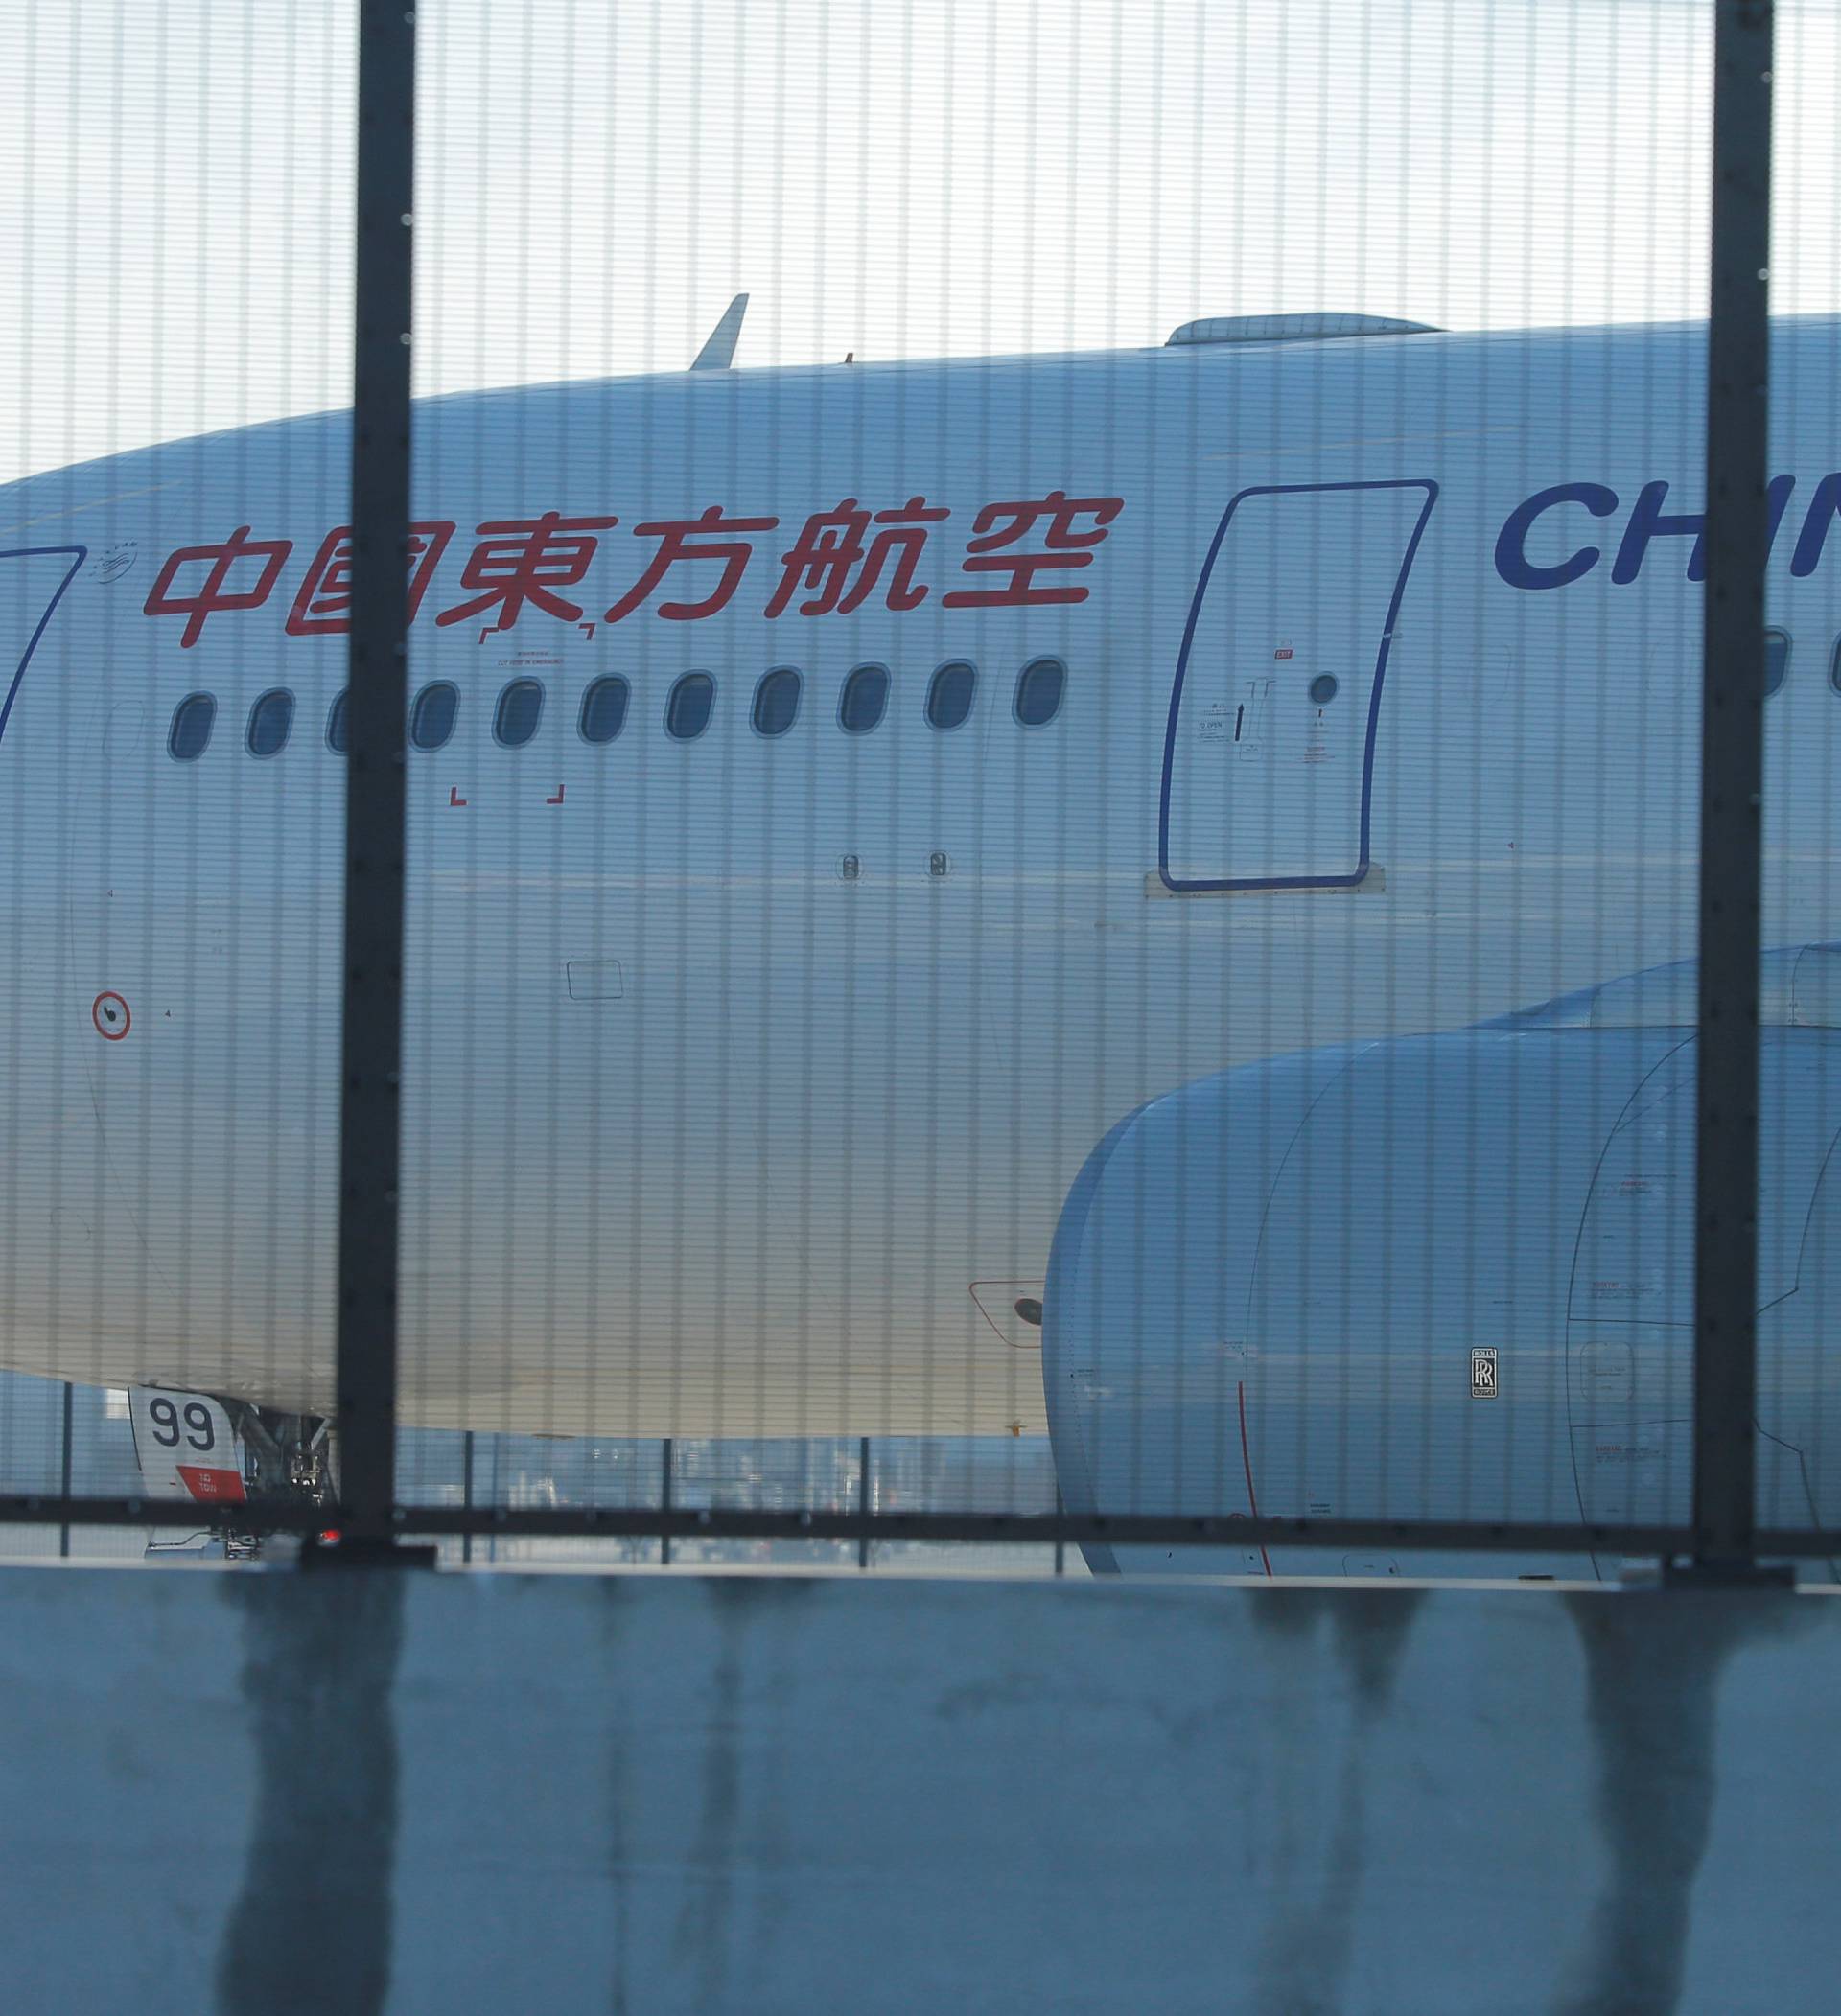 A China Eastern Airlines Airbus A330 aircraft sits on the tarmac at Sydney International Airport in Australia